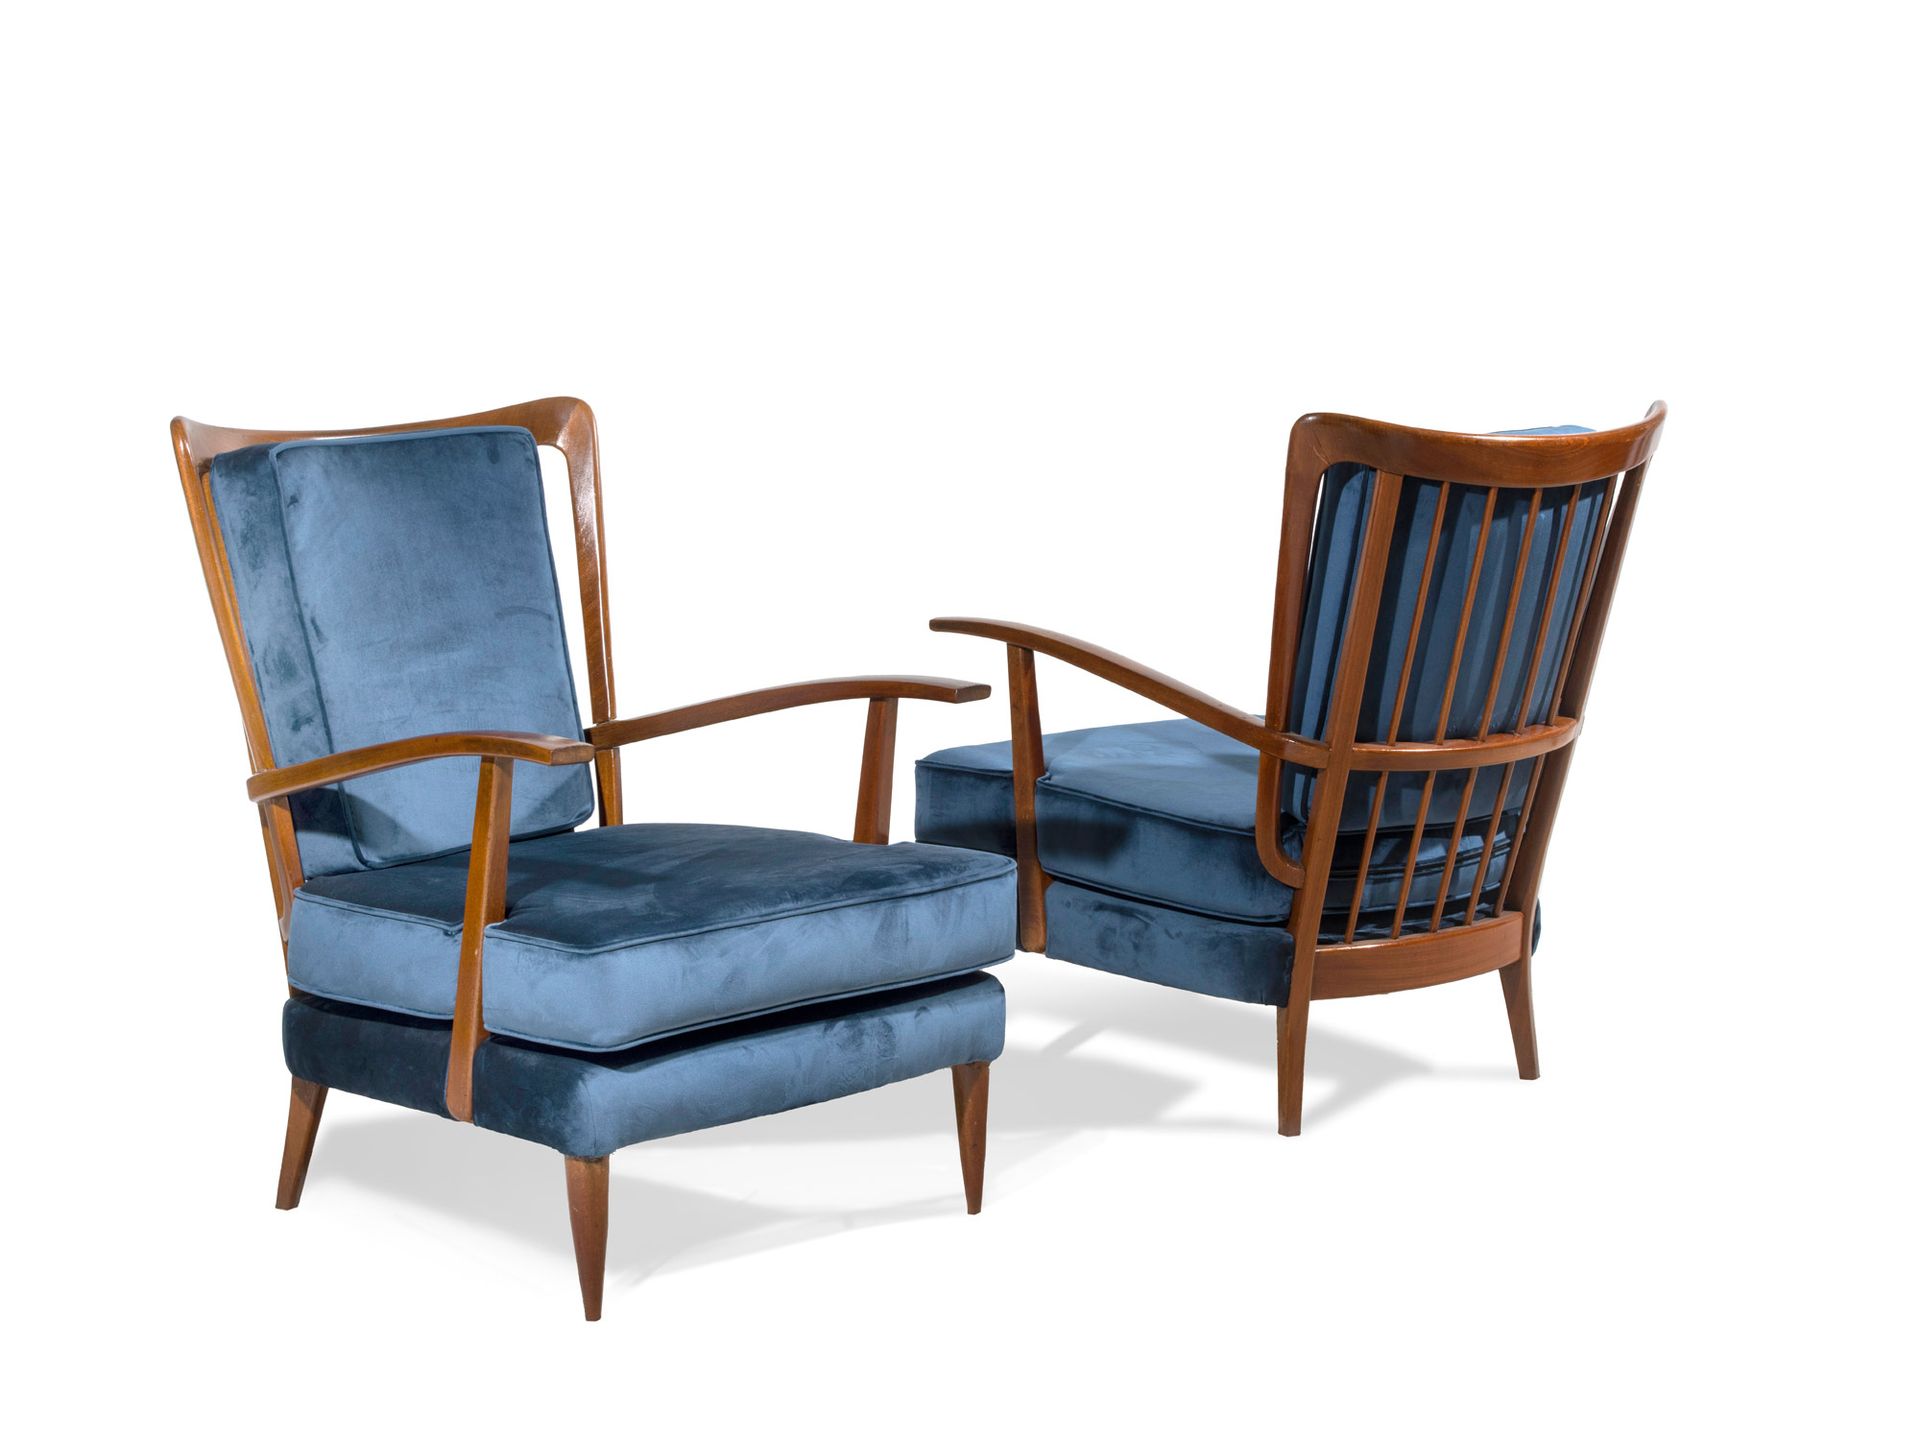 Paolo BUFFA (1903-1970) Pair of armchairs
Walnut, textile and brass 
Date of cre&hellip;